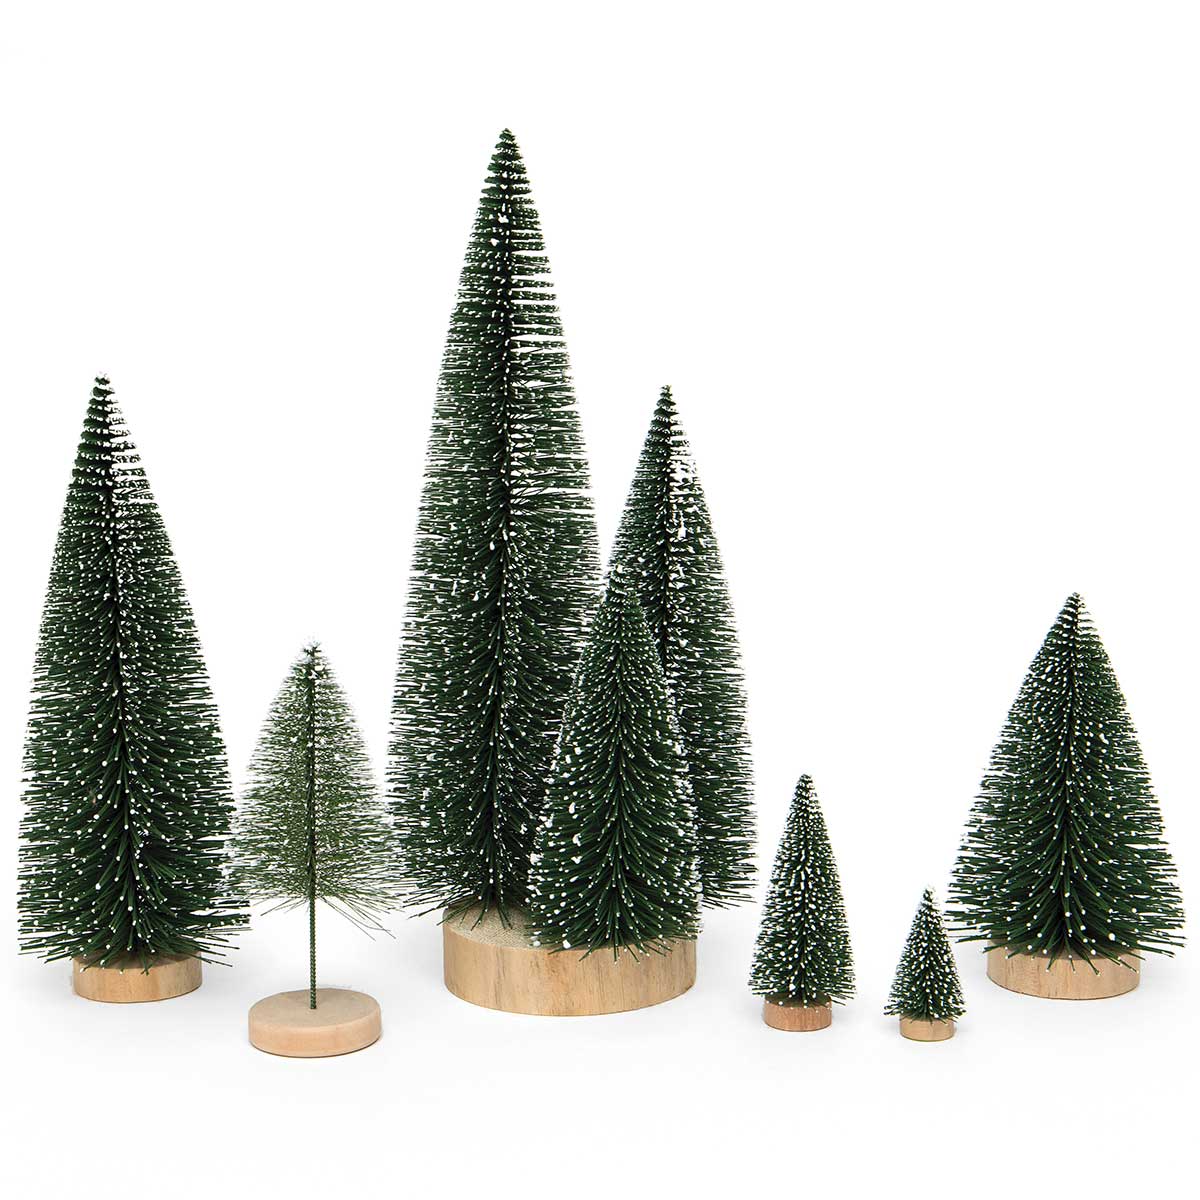 BRISTLE TREE GREEN 2IN X 6IN PVC/WOOD - Click Image to Close